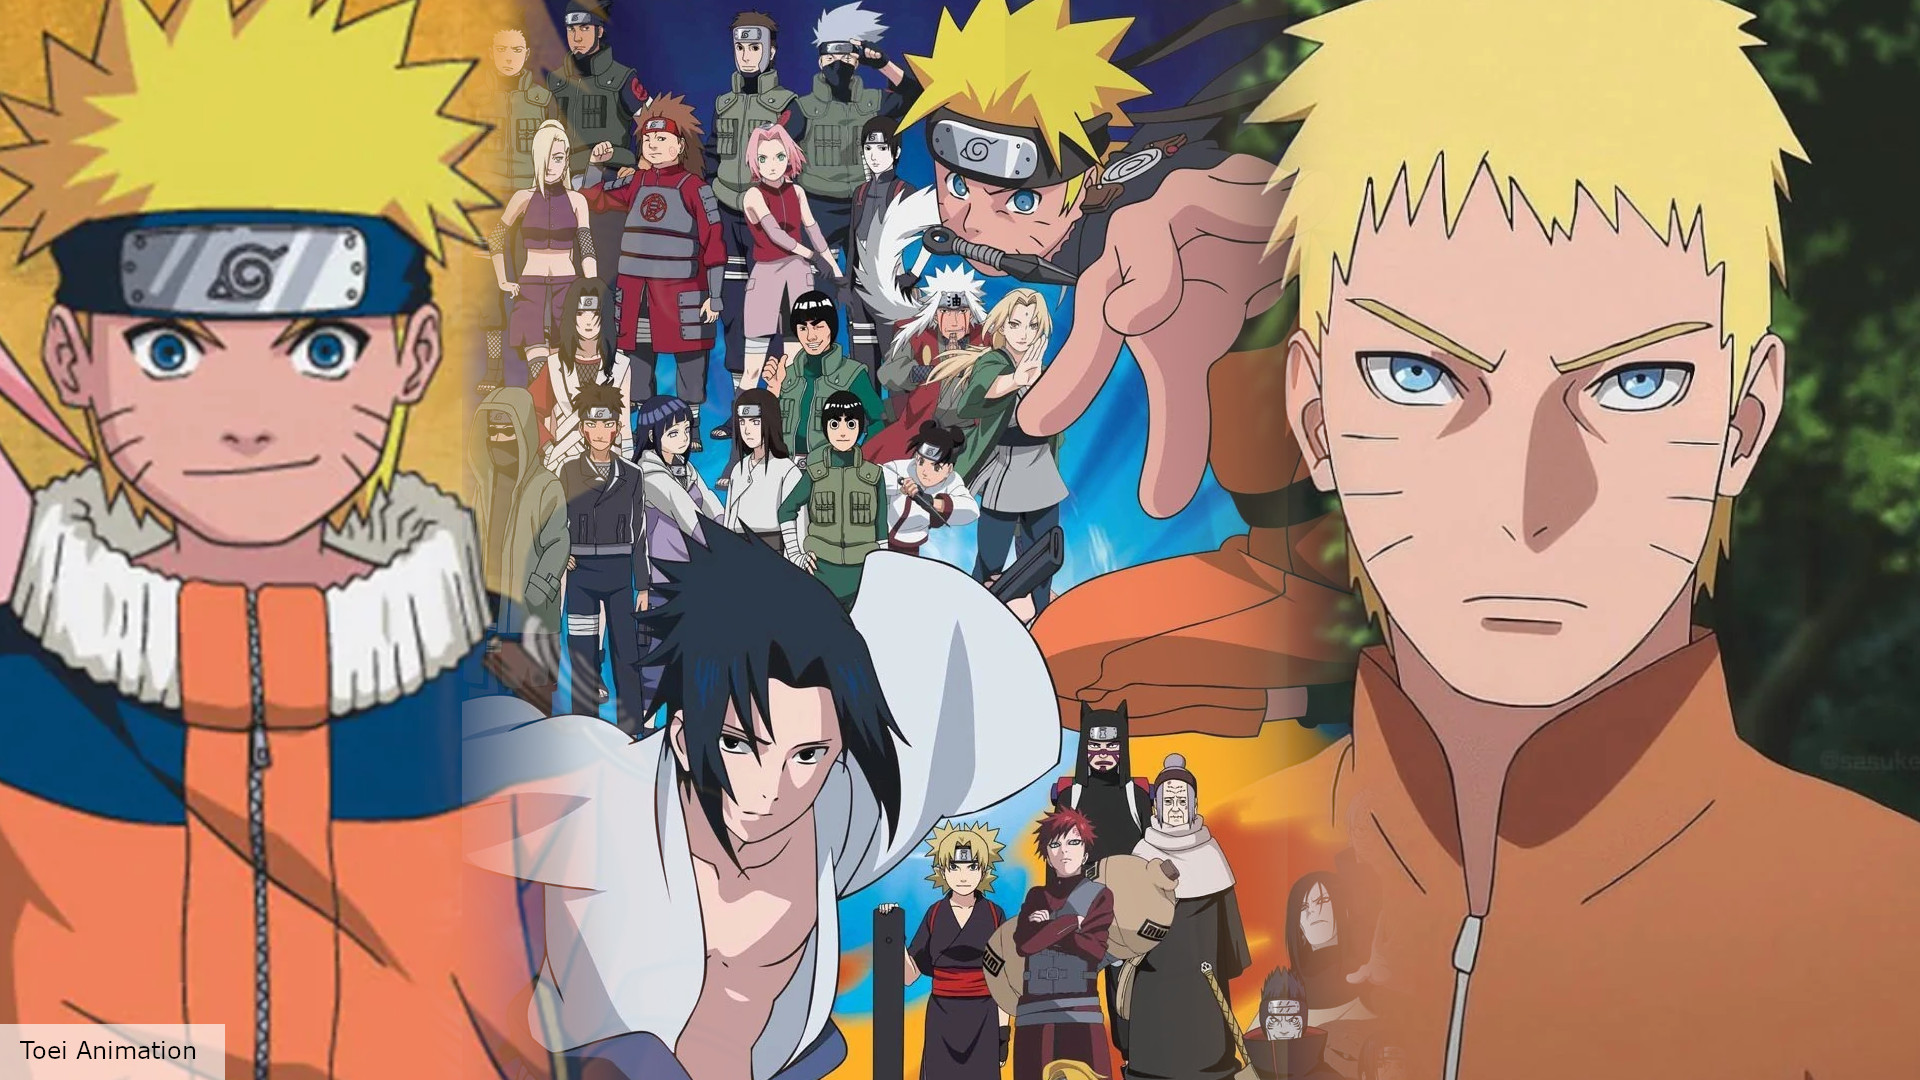 How To Watch 'Naruto' Arcs in Order Without Filler Episodes